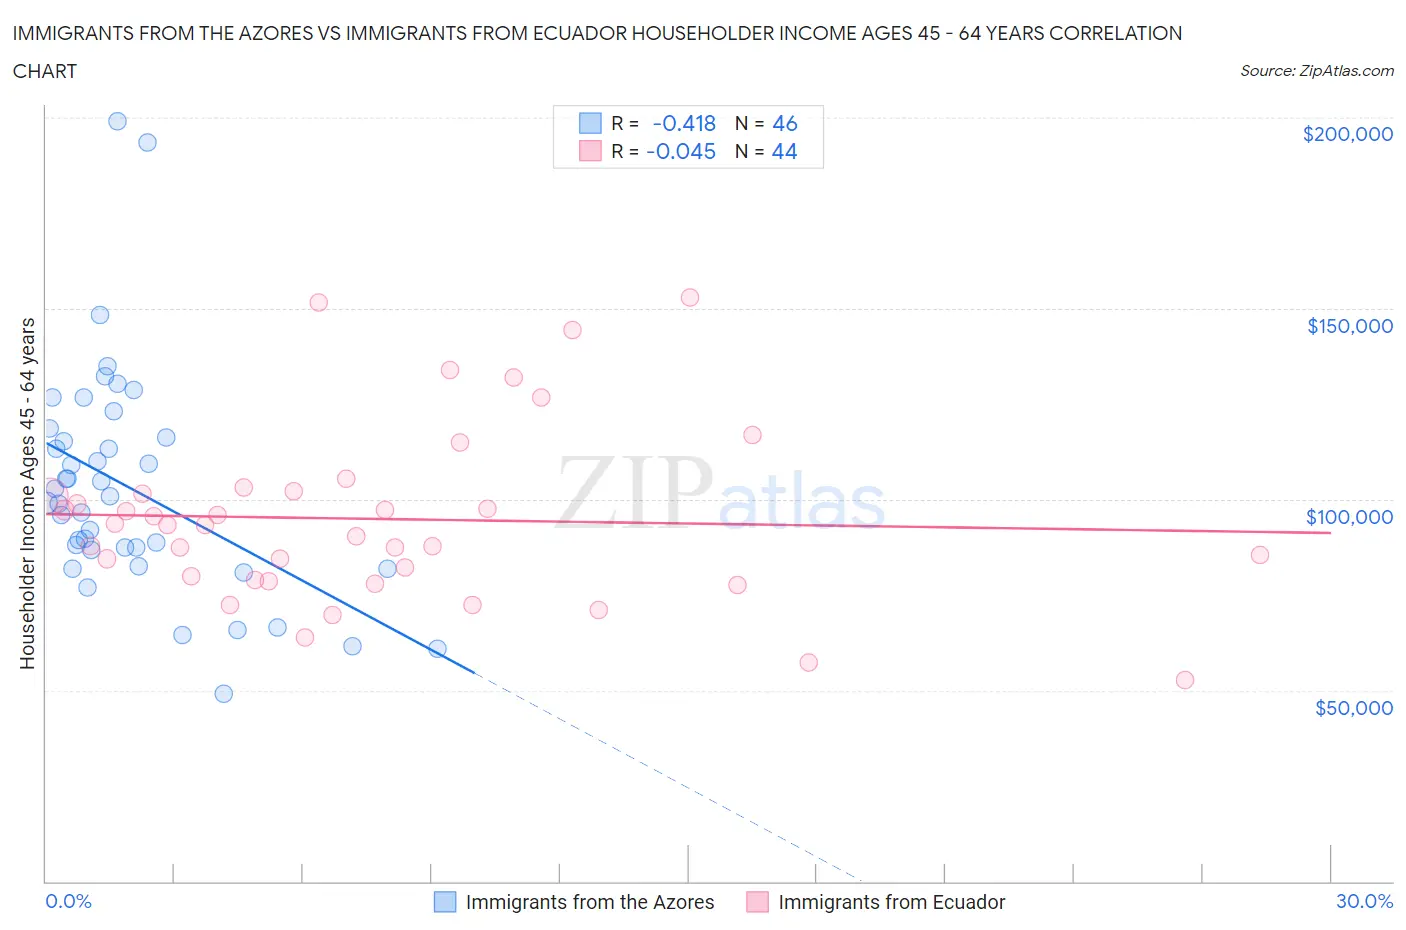 Immigrants from the Azores vs Immigrants from Ecuador Householder Income Ages 45 - 64 years